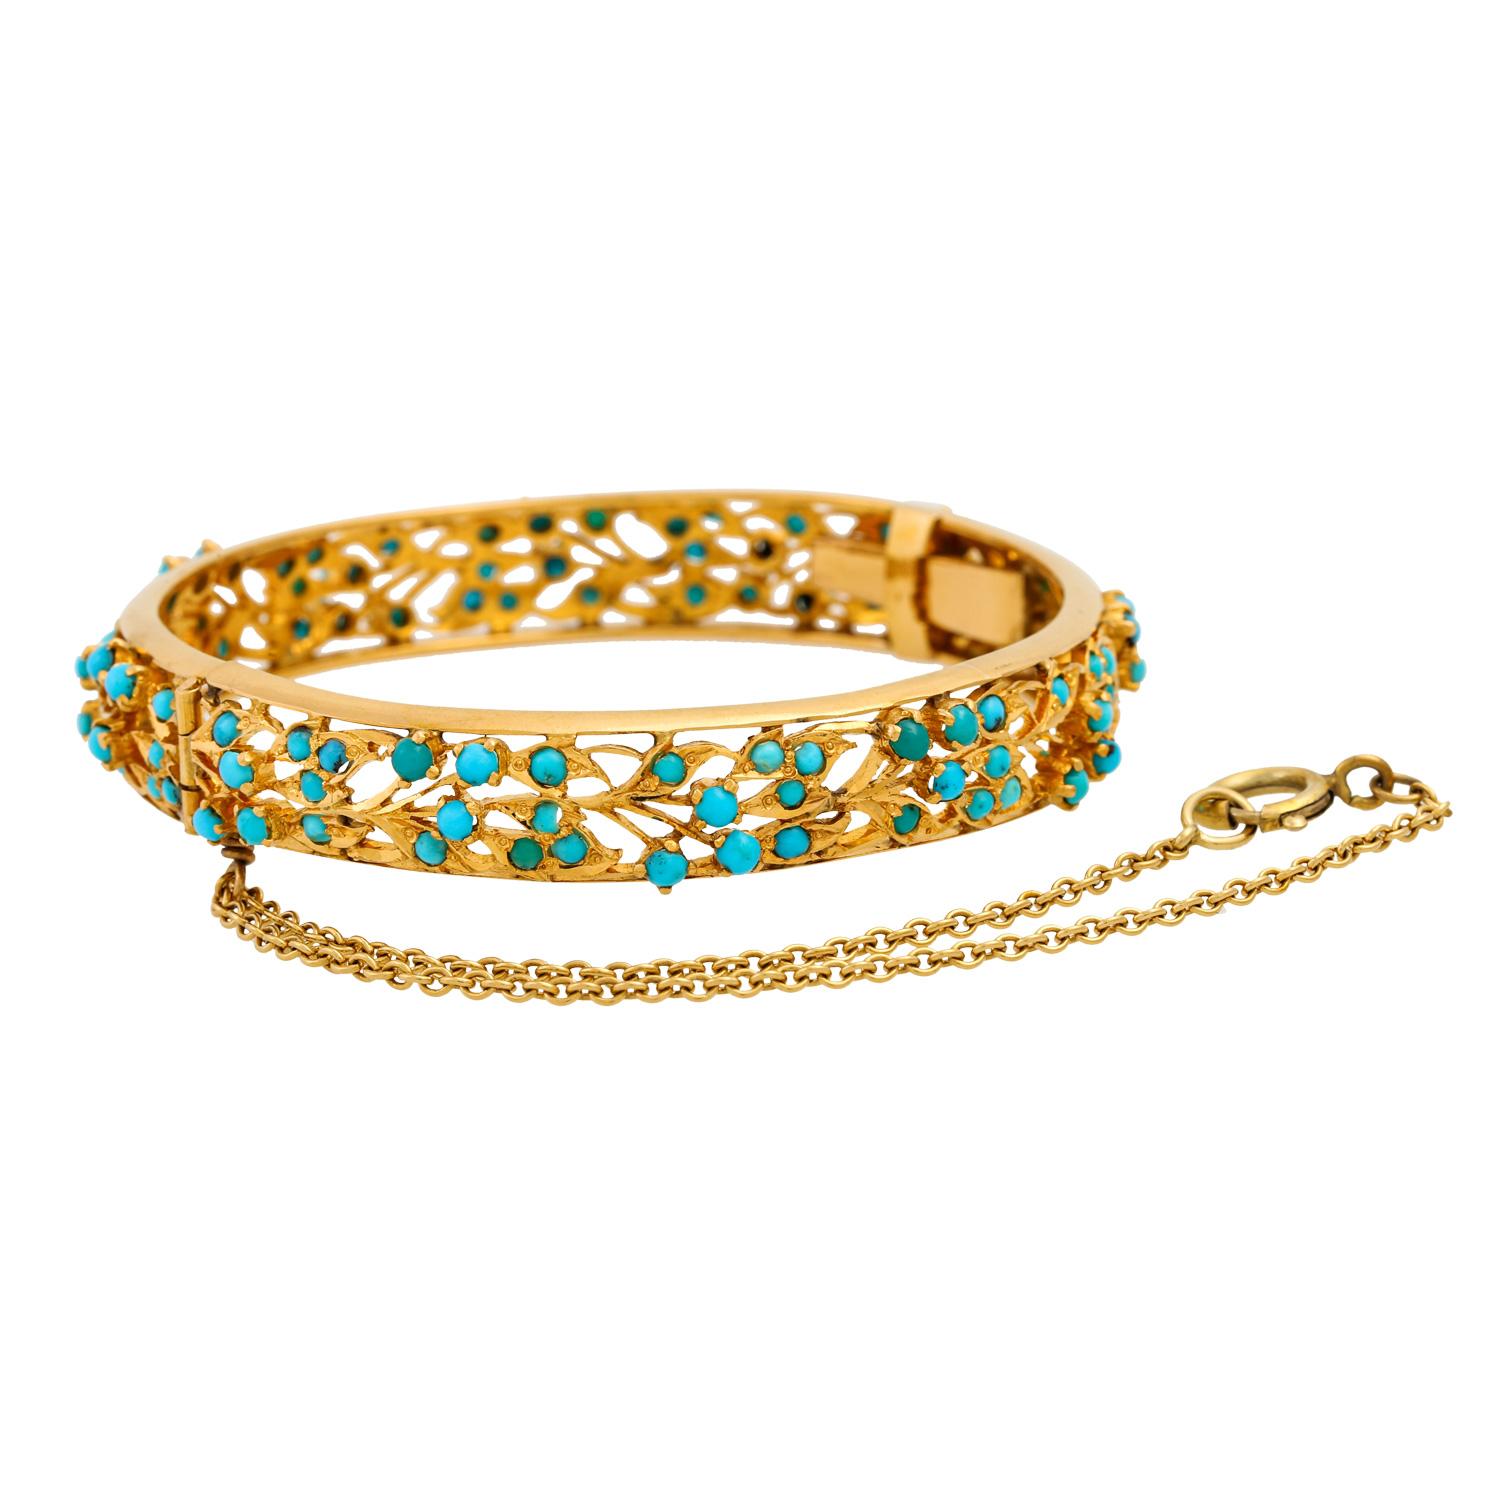 Filigree bracelet with turquoise cabochon, GG 20K, box clasp and safety bracelet, L: approx. 18 cm.